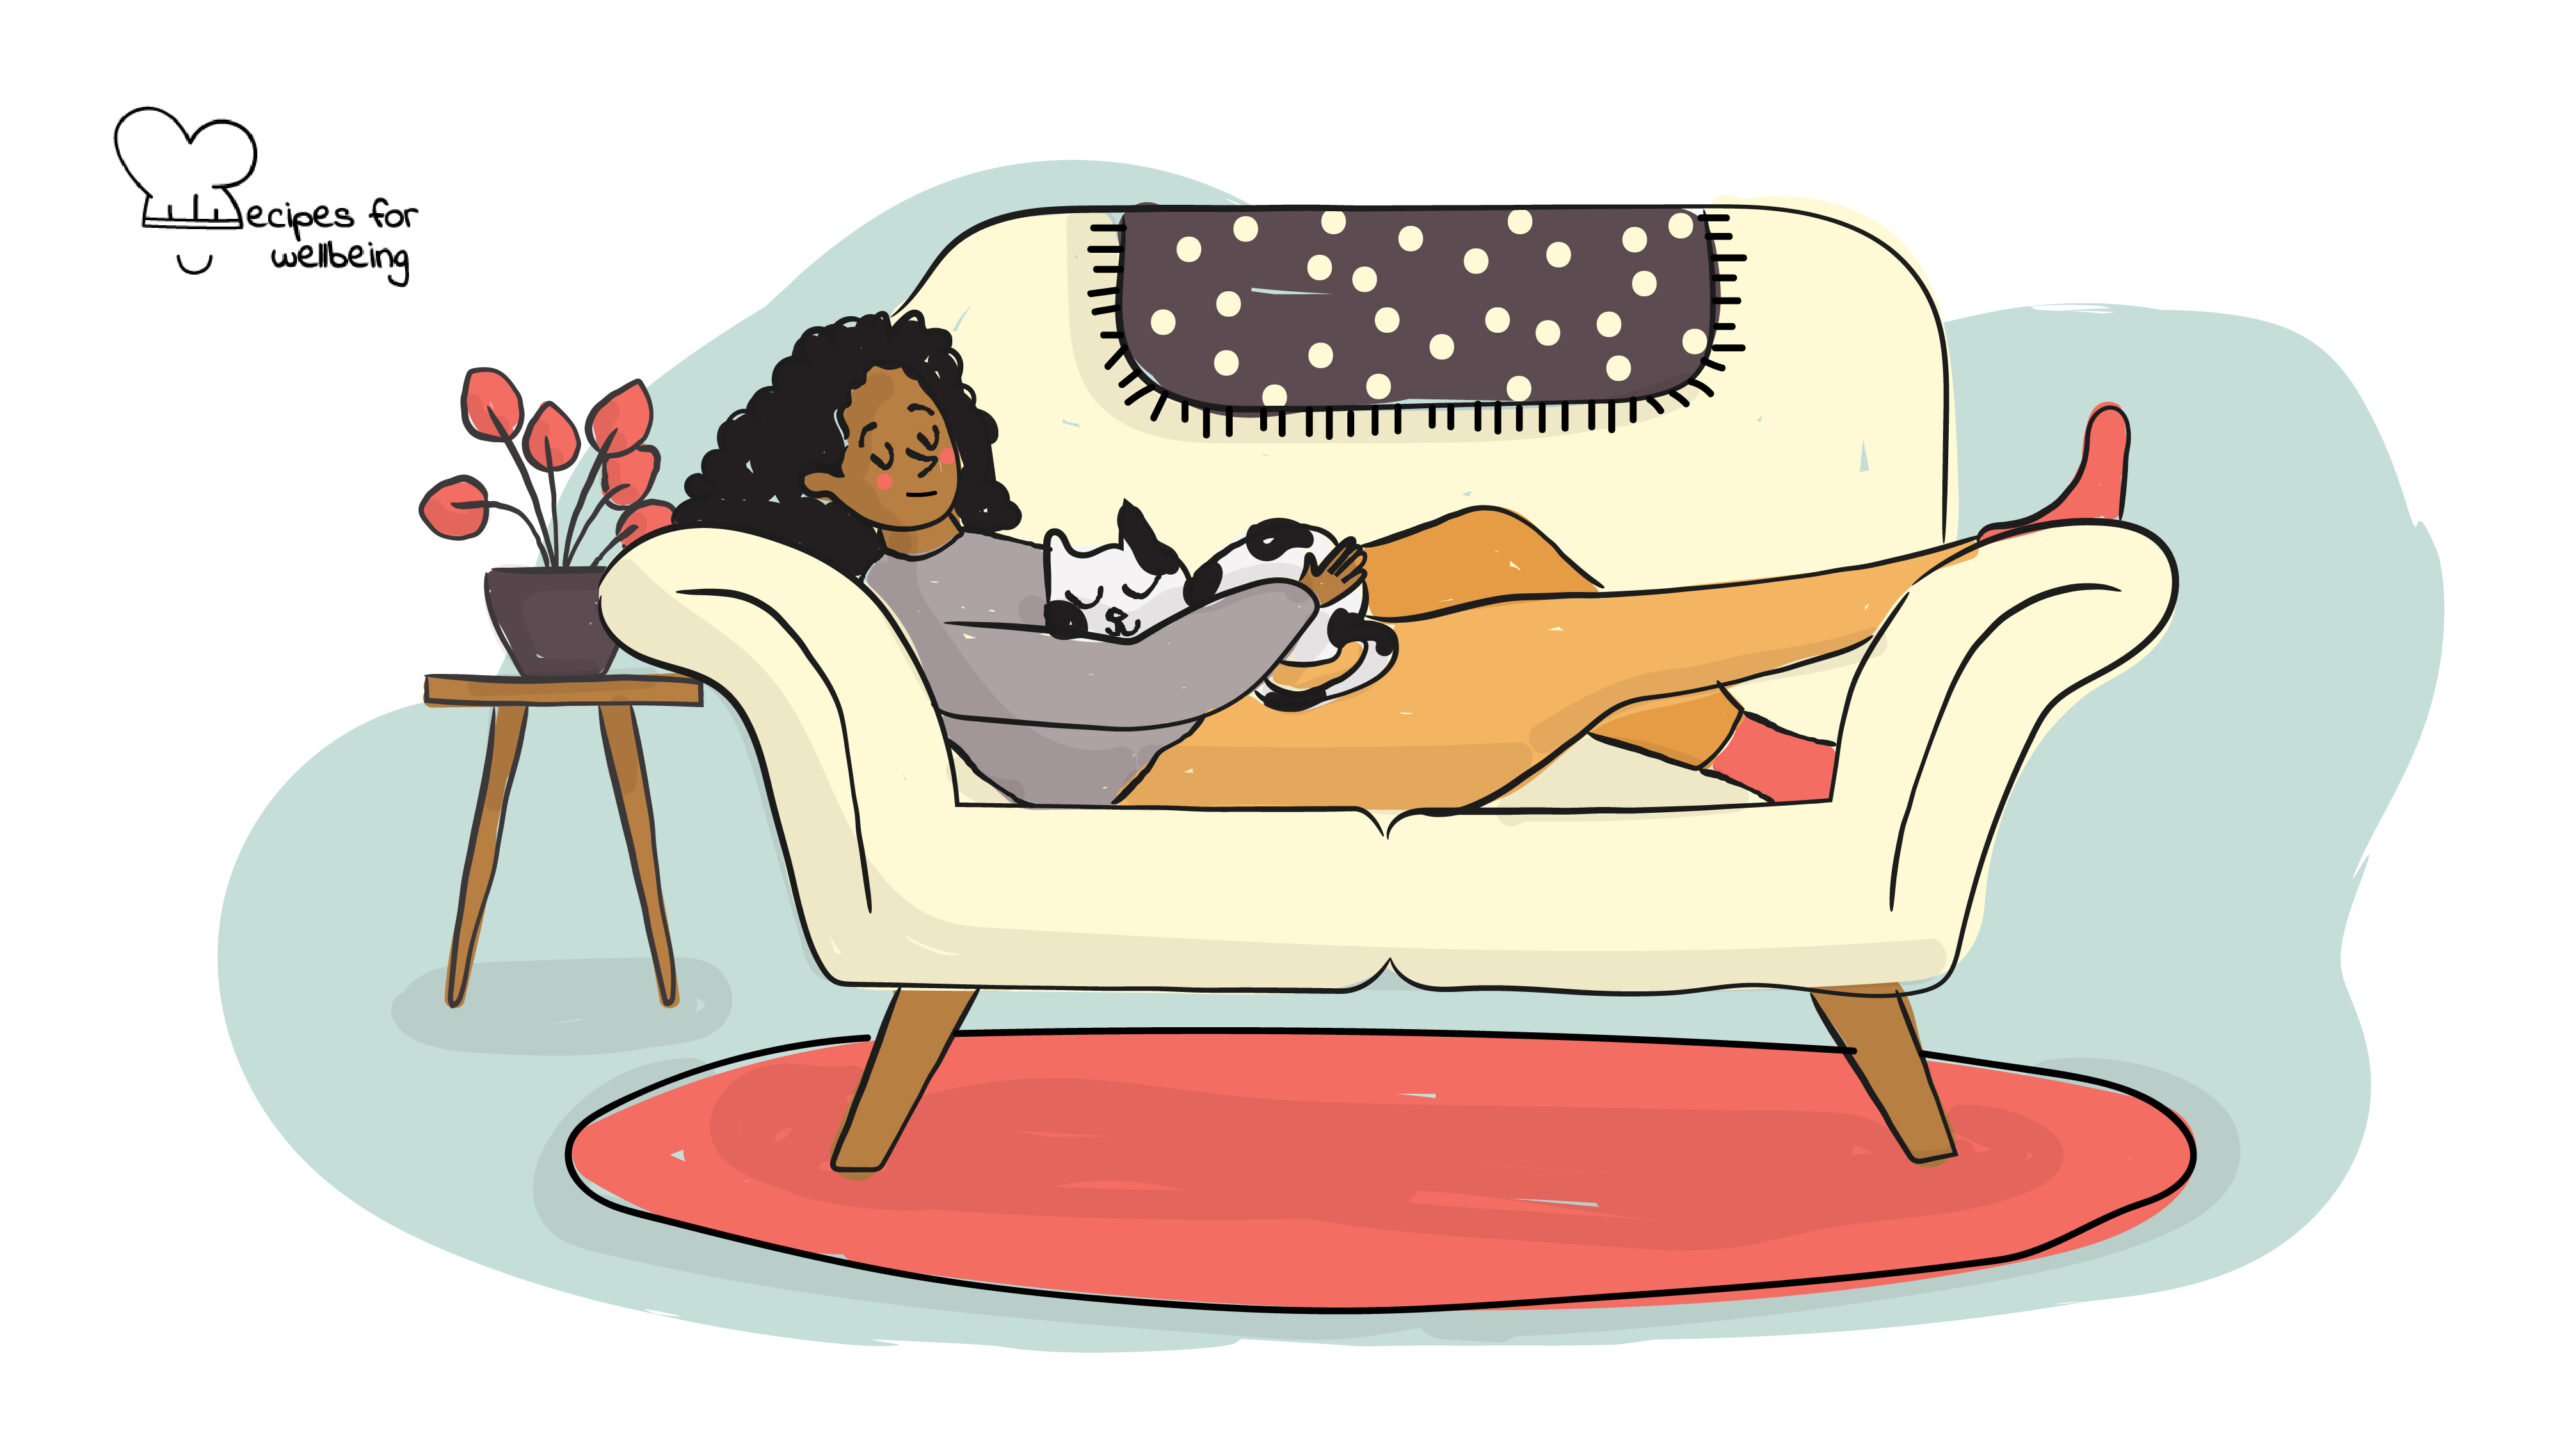 Illustration of a person resting on a couch with a cat on the lap. © Recipes for Wellbeing